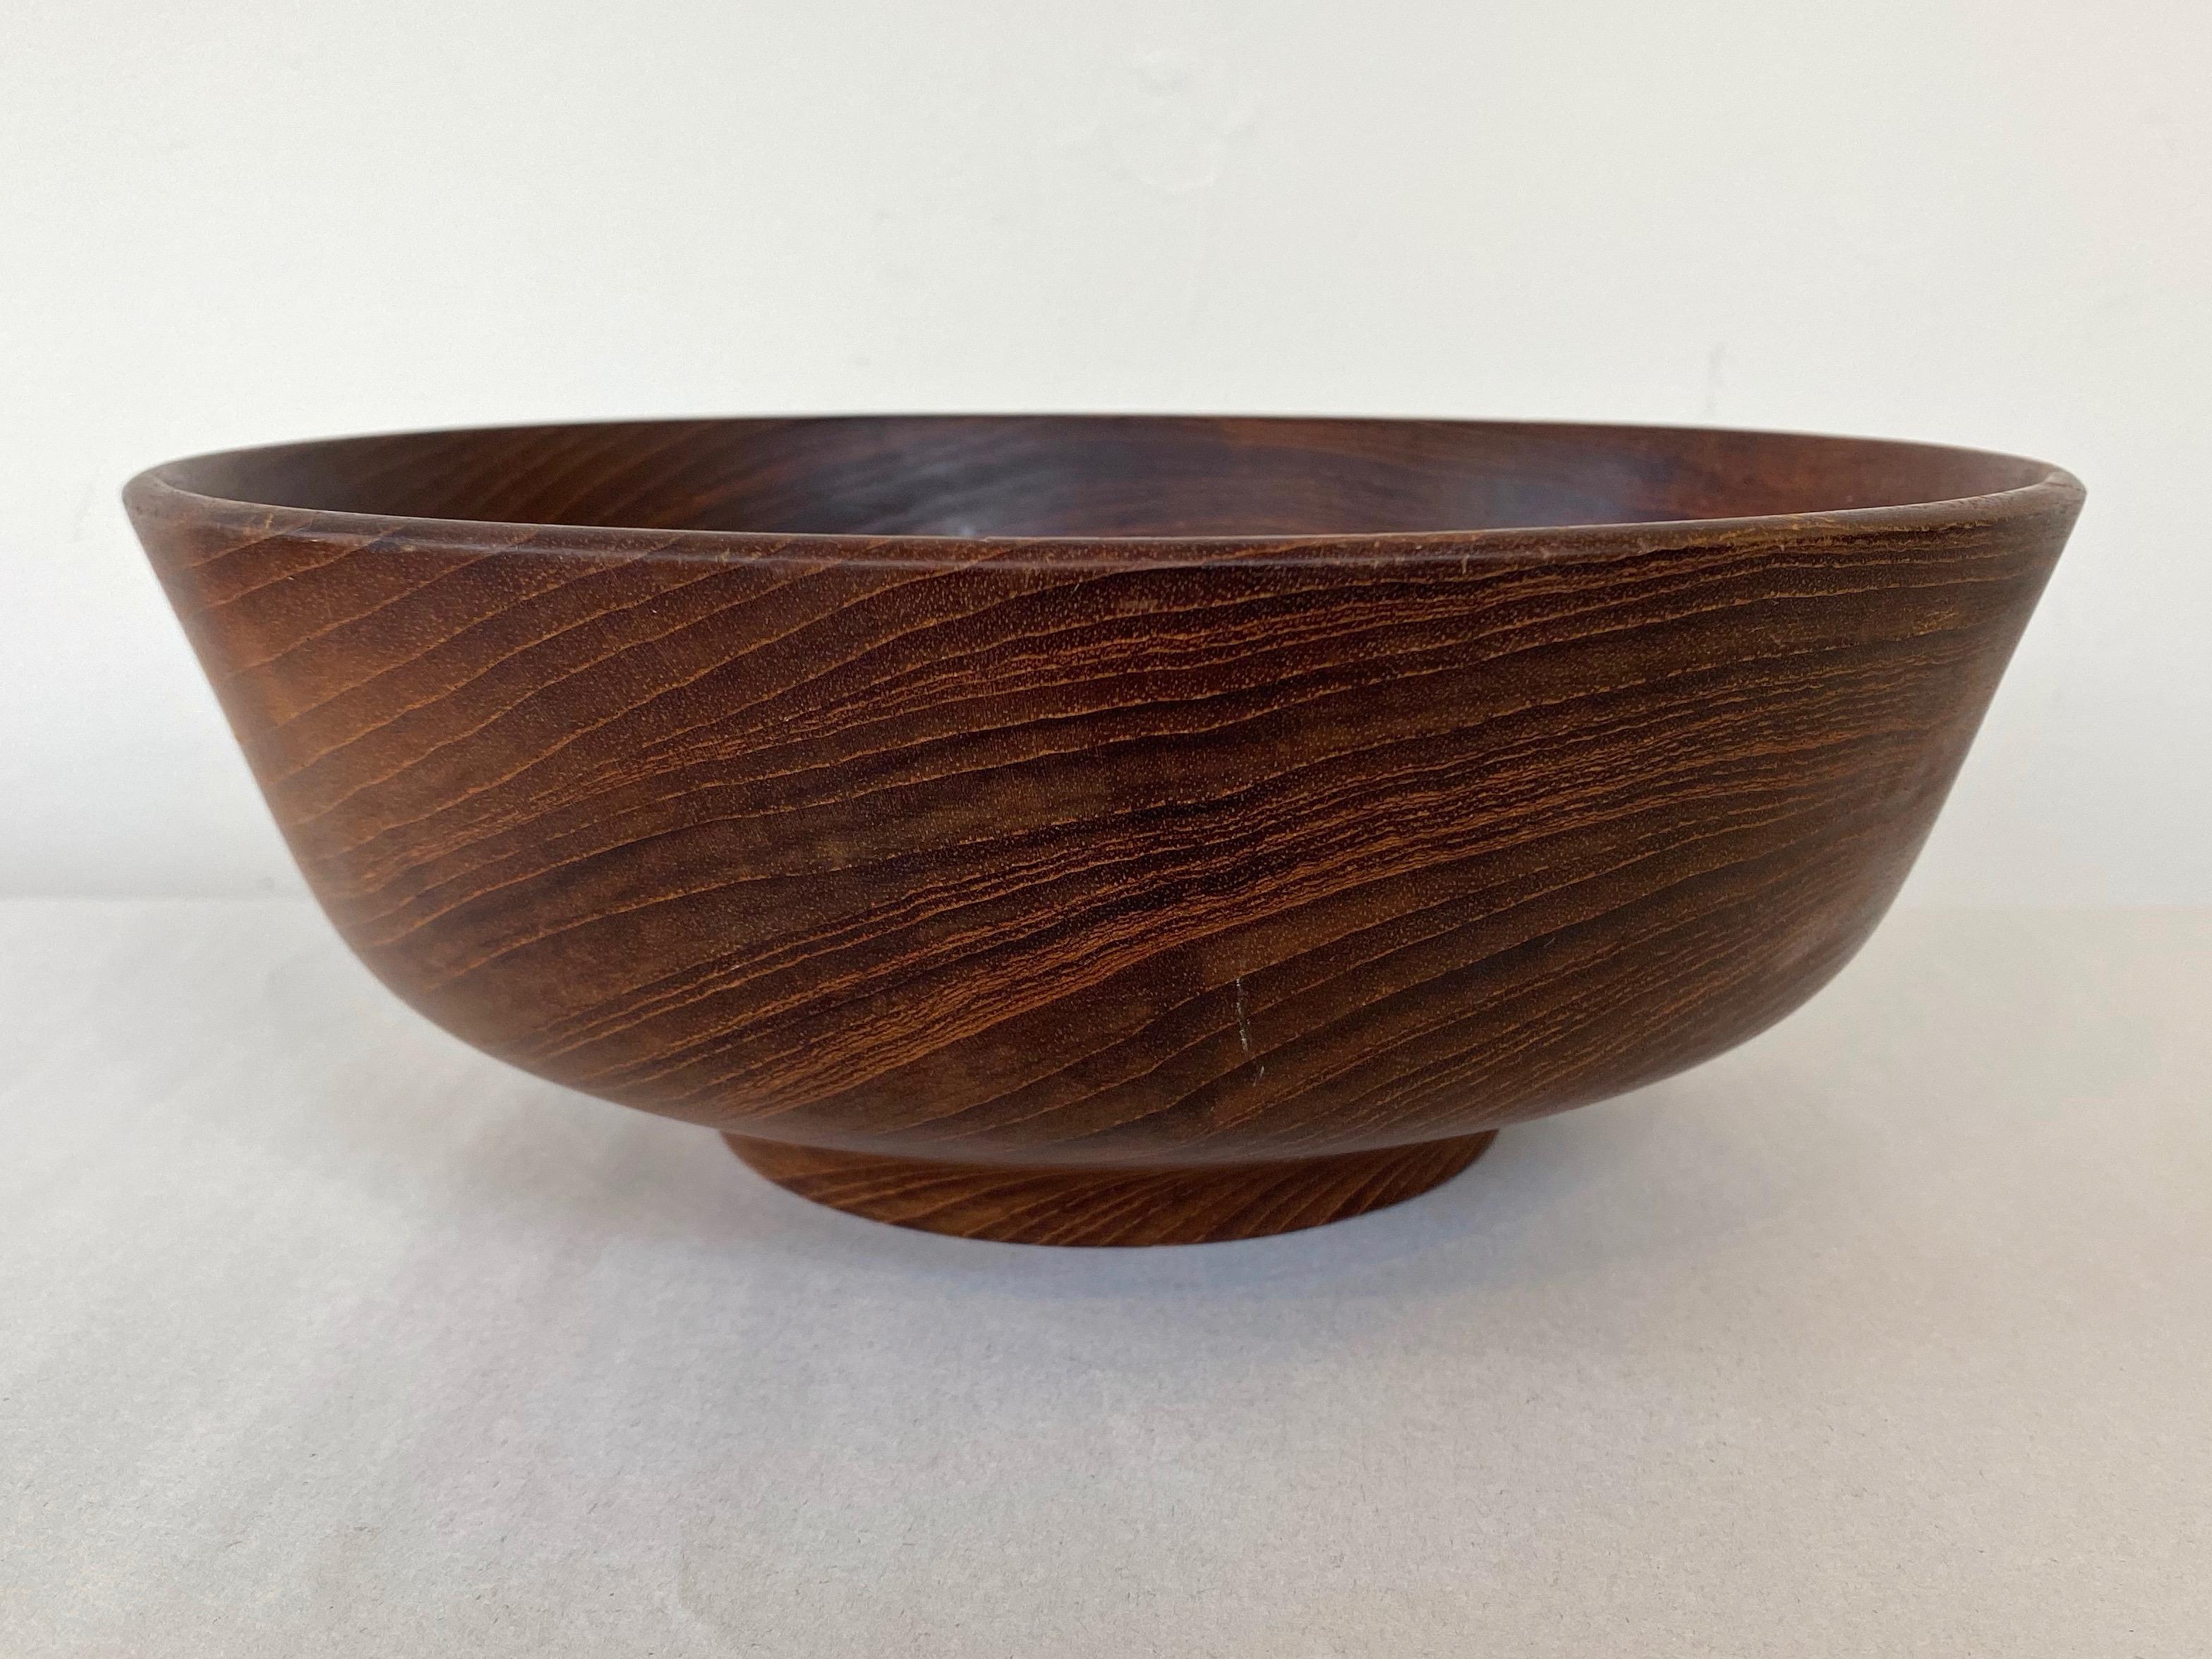 Late 20th Century Bob Stocksdale Teak Turned Wood Bowl with Exceptional Grain Pattern, Early 1970s For Sale